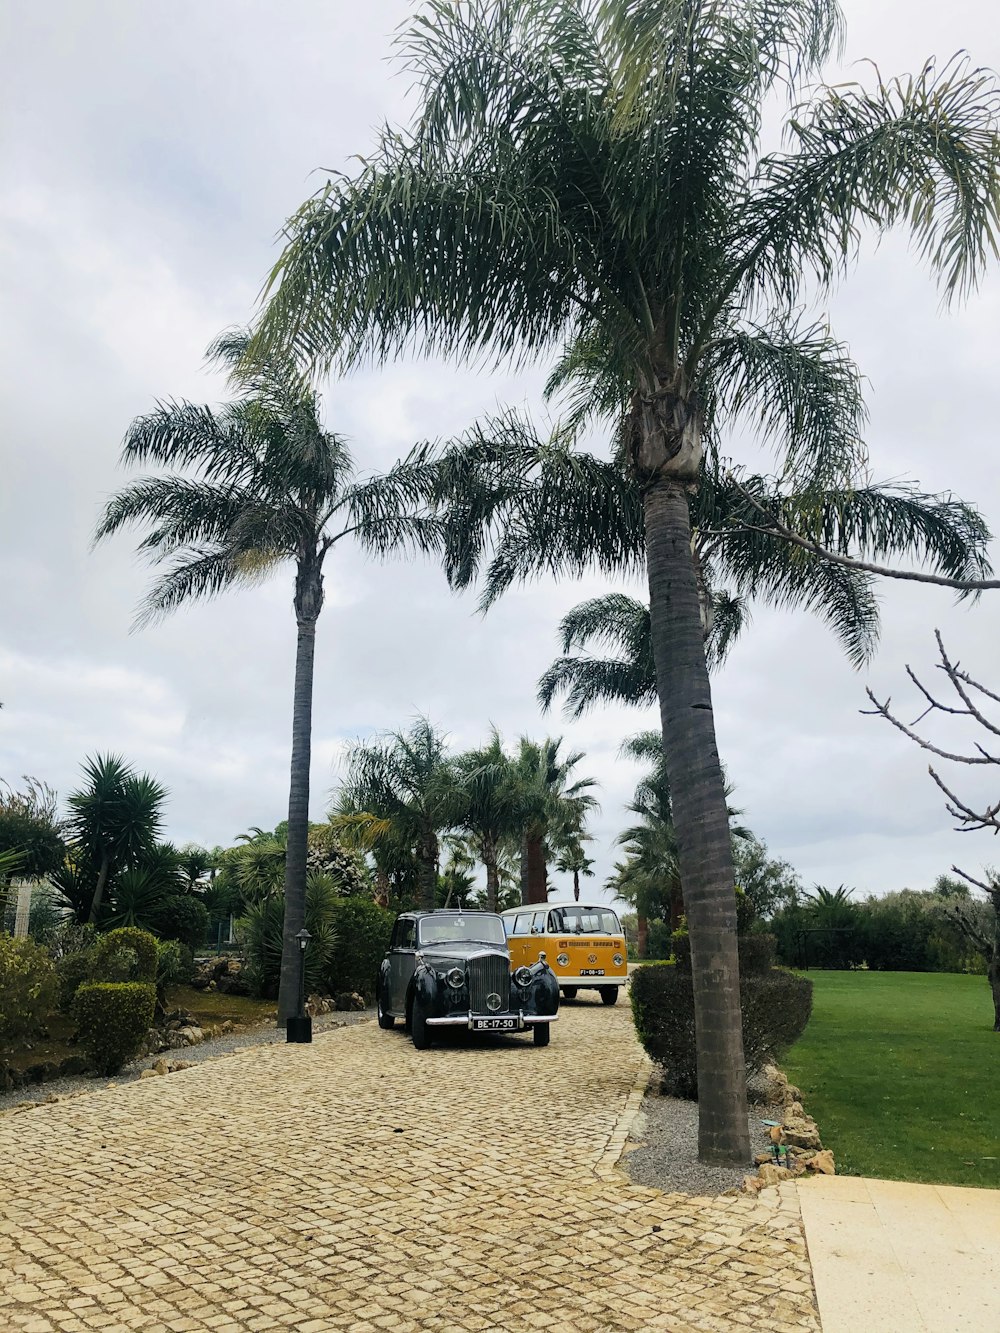 yellow and black truck on green grass field near palm trees during daytime